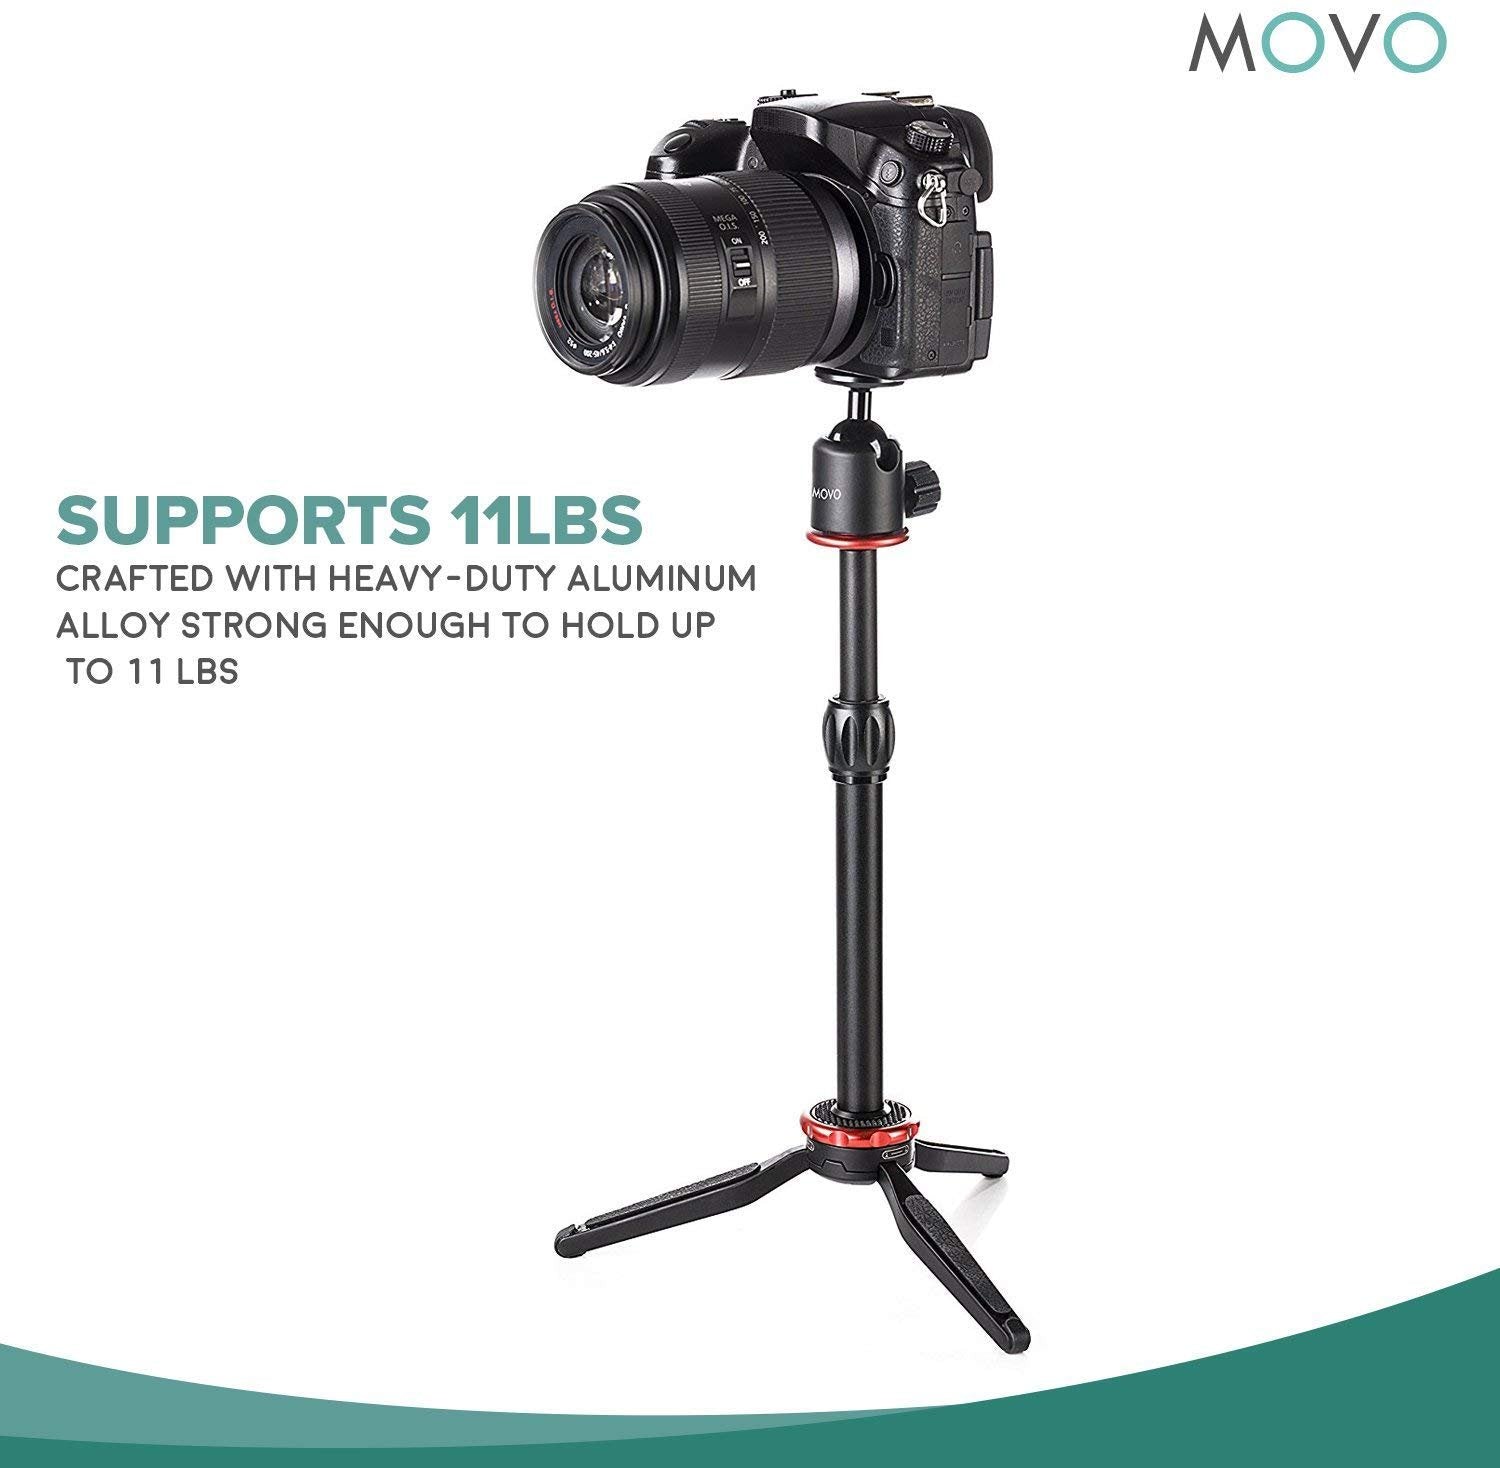 Movo Universal Mini Camera Tripod with Extendable Pole (MV-T1) Adjustable Head, Heavy-Duty Aluminum Travel Stand for DSLR, Mirrorless, GoPro, Smartphones, Compact, Portable